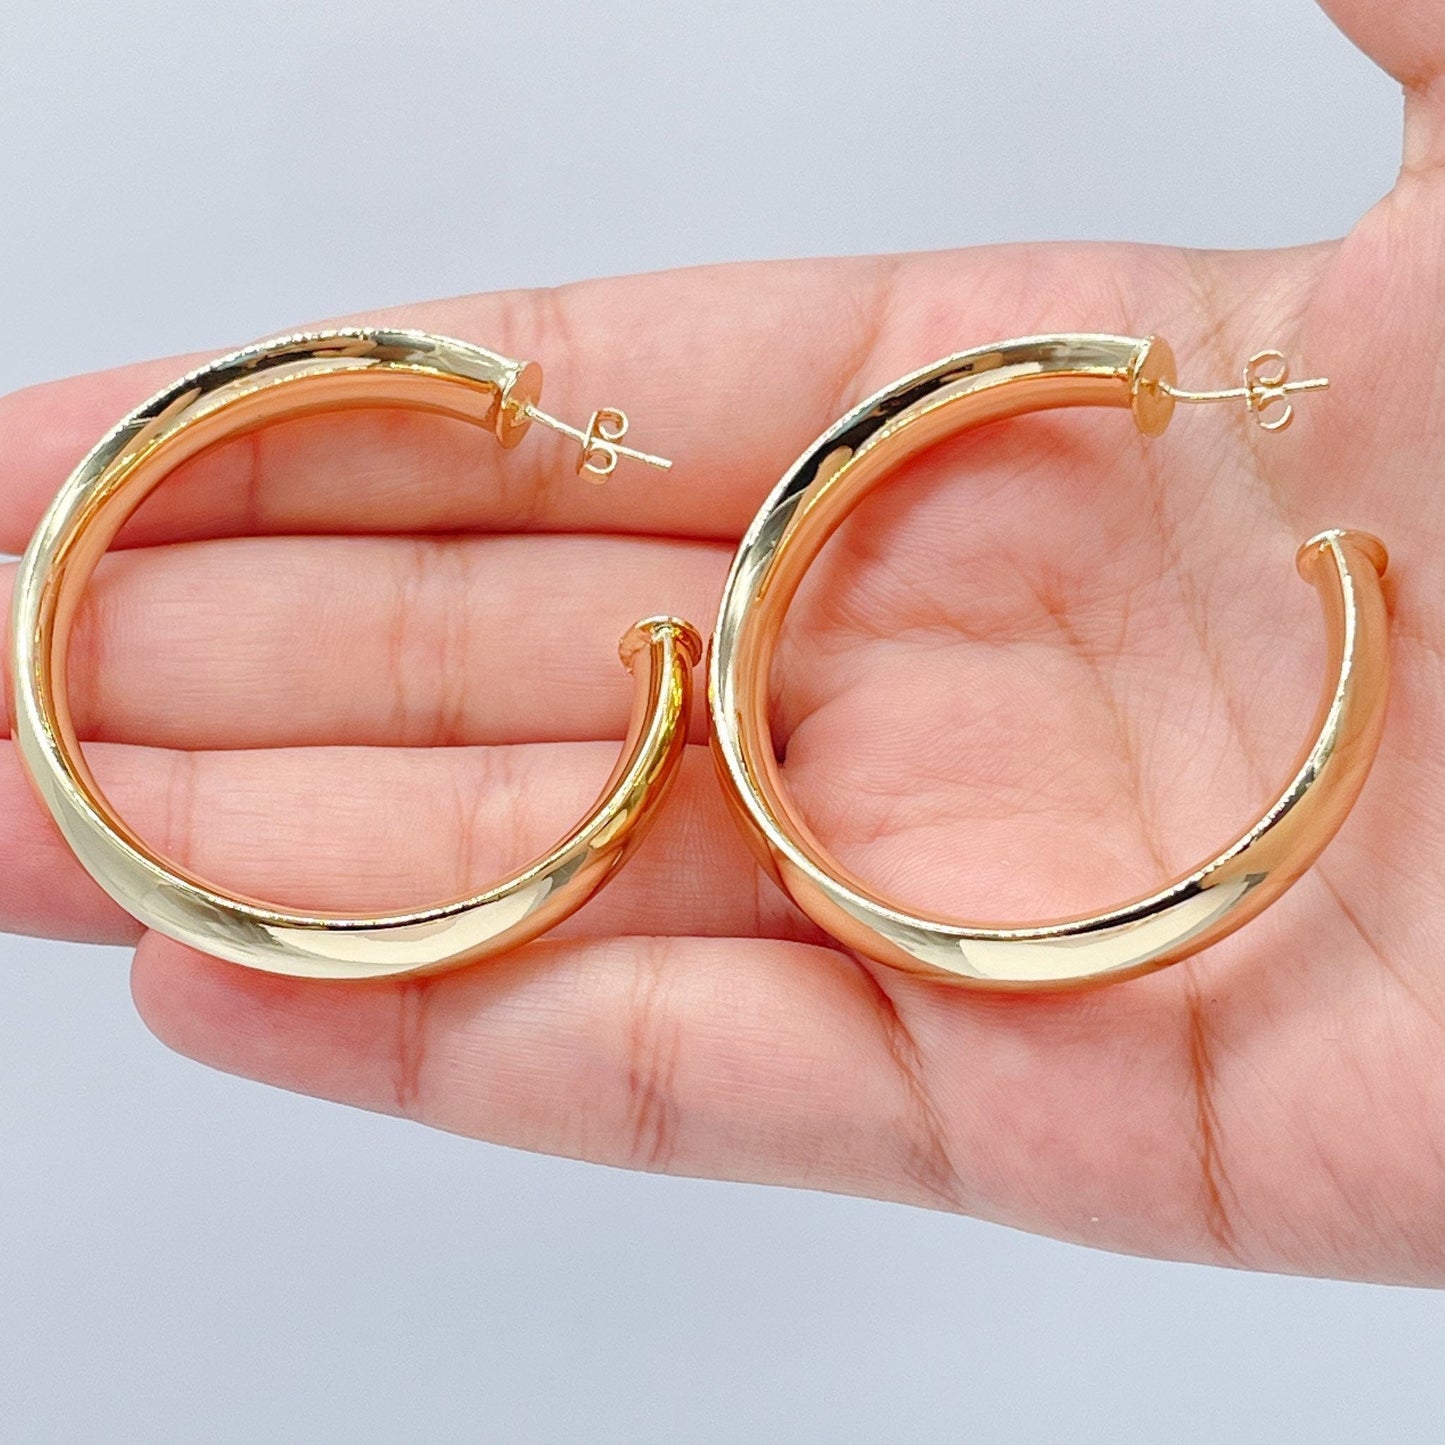 18k Gold Layered Plain Turn Around 10mm Thick Hoop Earrings Available in 30mm,